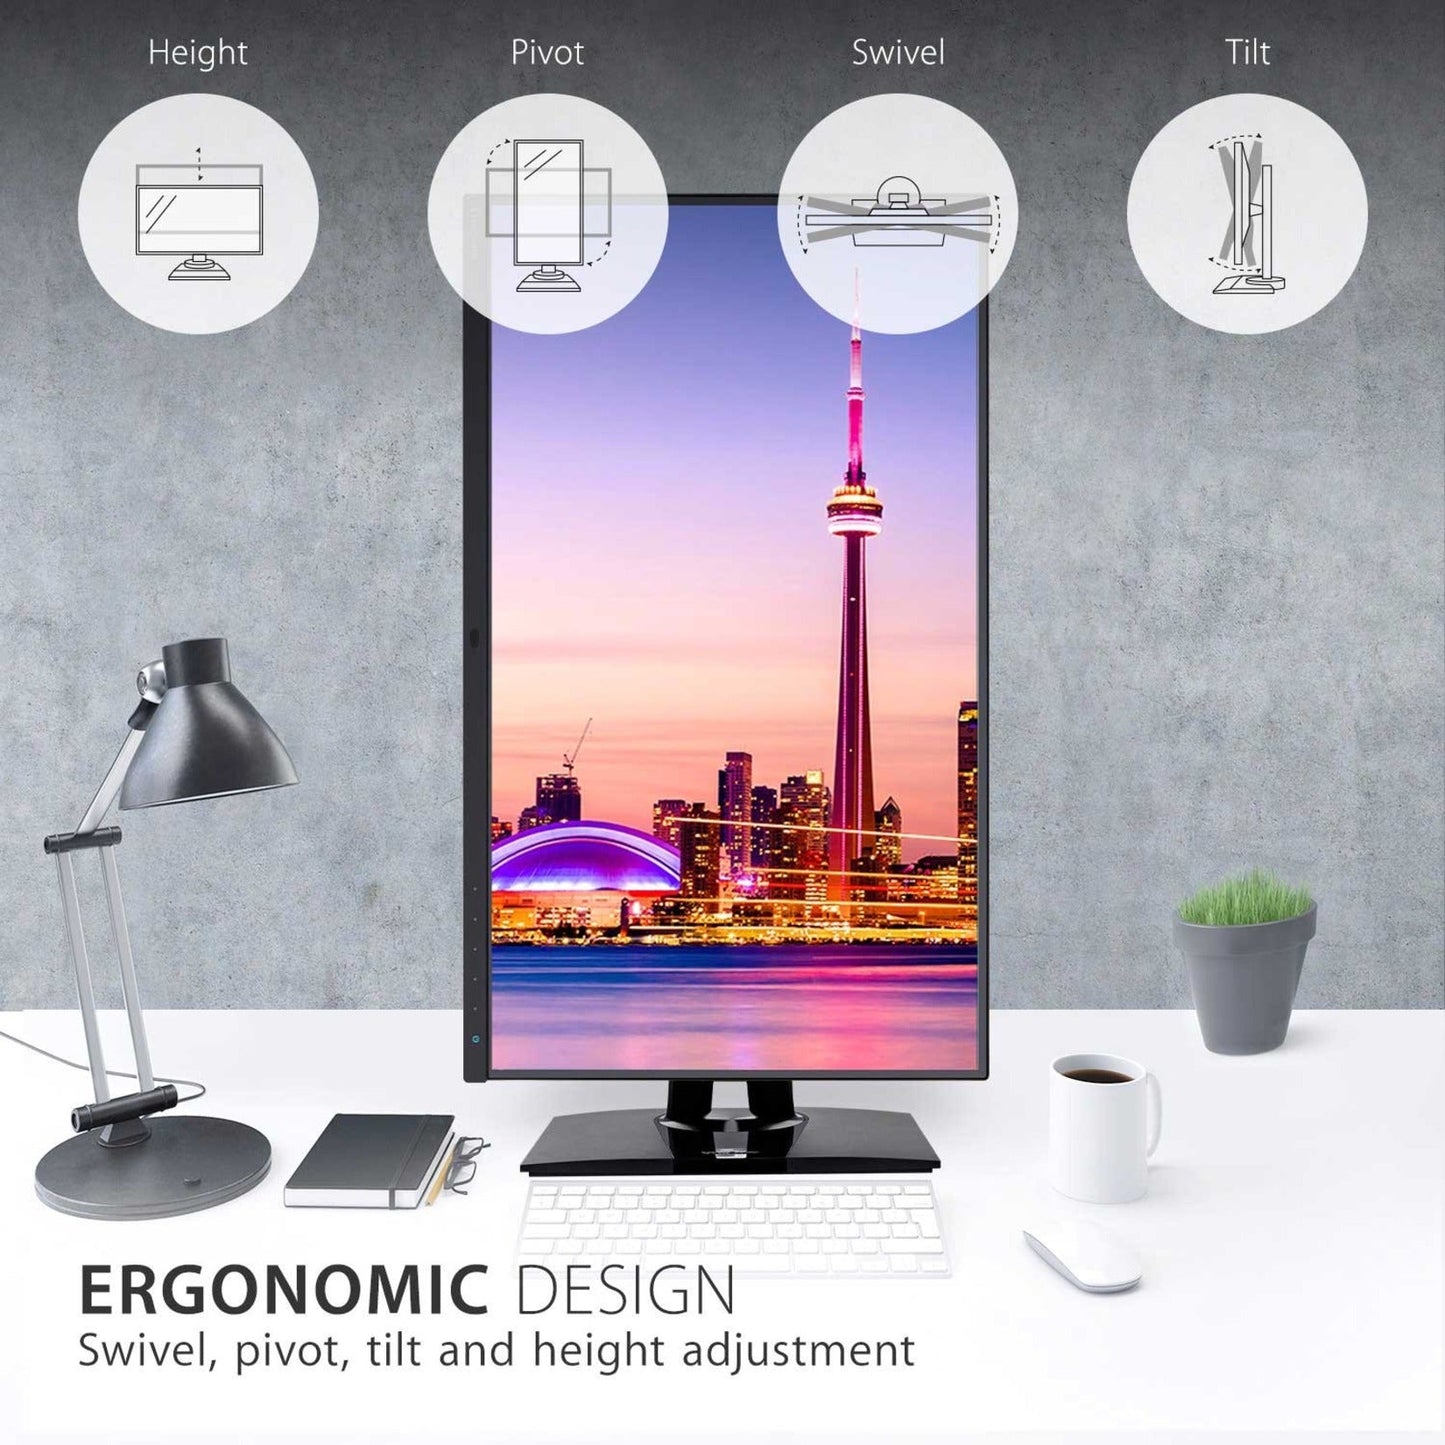 ViewSonic VP2785-4K 27-Inch Premium IPS 4K Monitor with Advanced Ergonomics ColorPro 99%A AdobeRGB Rec 709 14-bit 3D LUT Eye Care 65W USB C HDMI DP for Home and Office